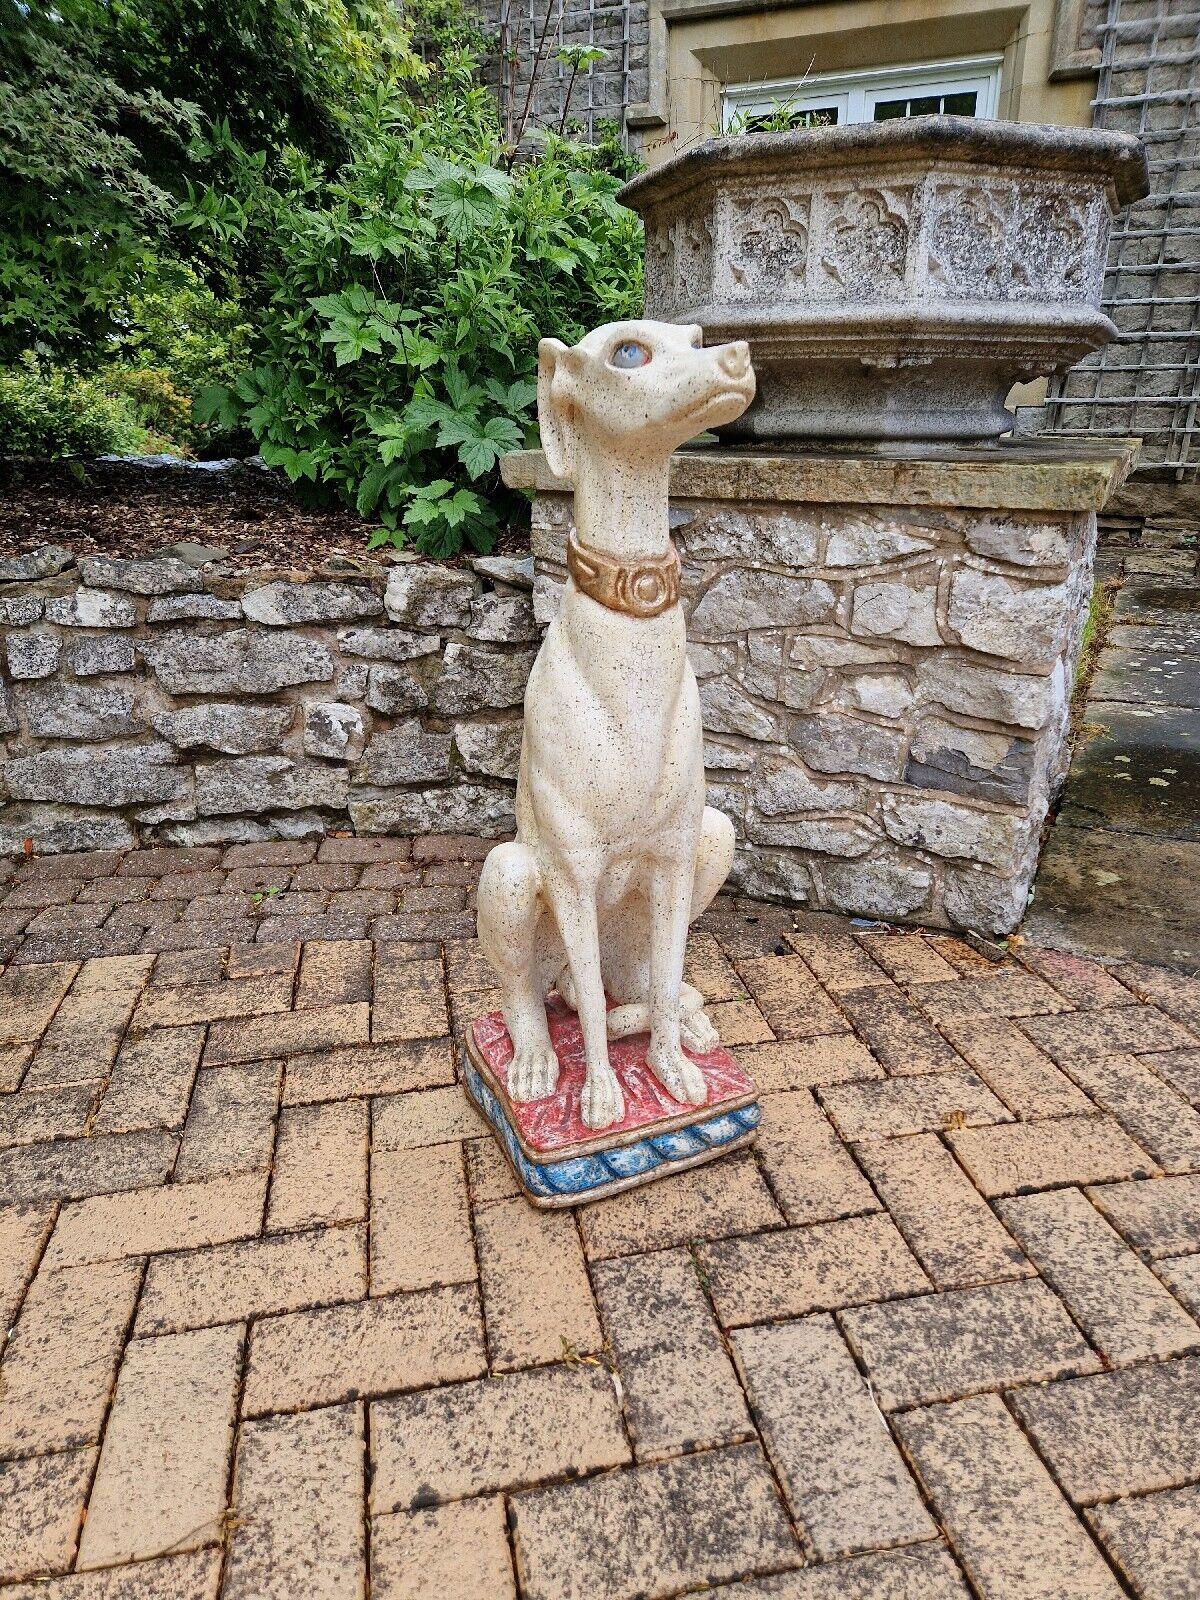 This Absolutely Superb Italian Sitting Greyhound of the Venetian Style, would look Fantastic in the Home or Commercial Environment. 



Sourced from the Rome area of Italy this Fabulous Decorative Life Size White Lacquered Greyhound has Beautiful